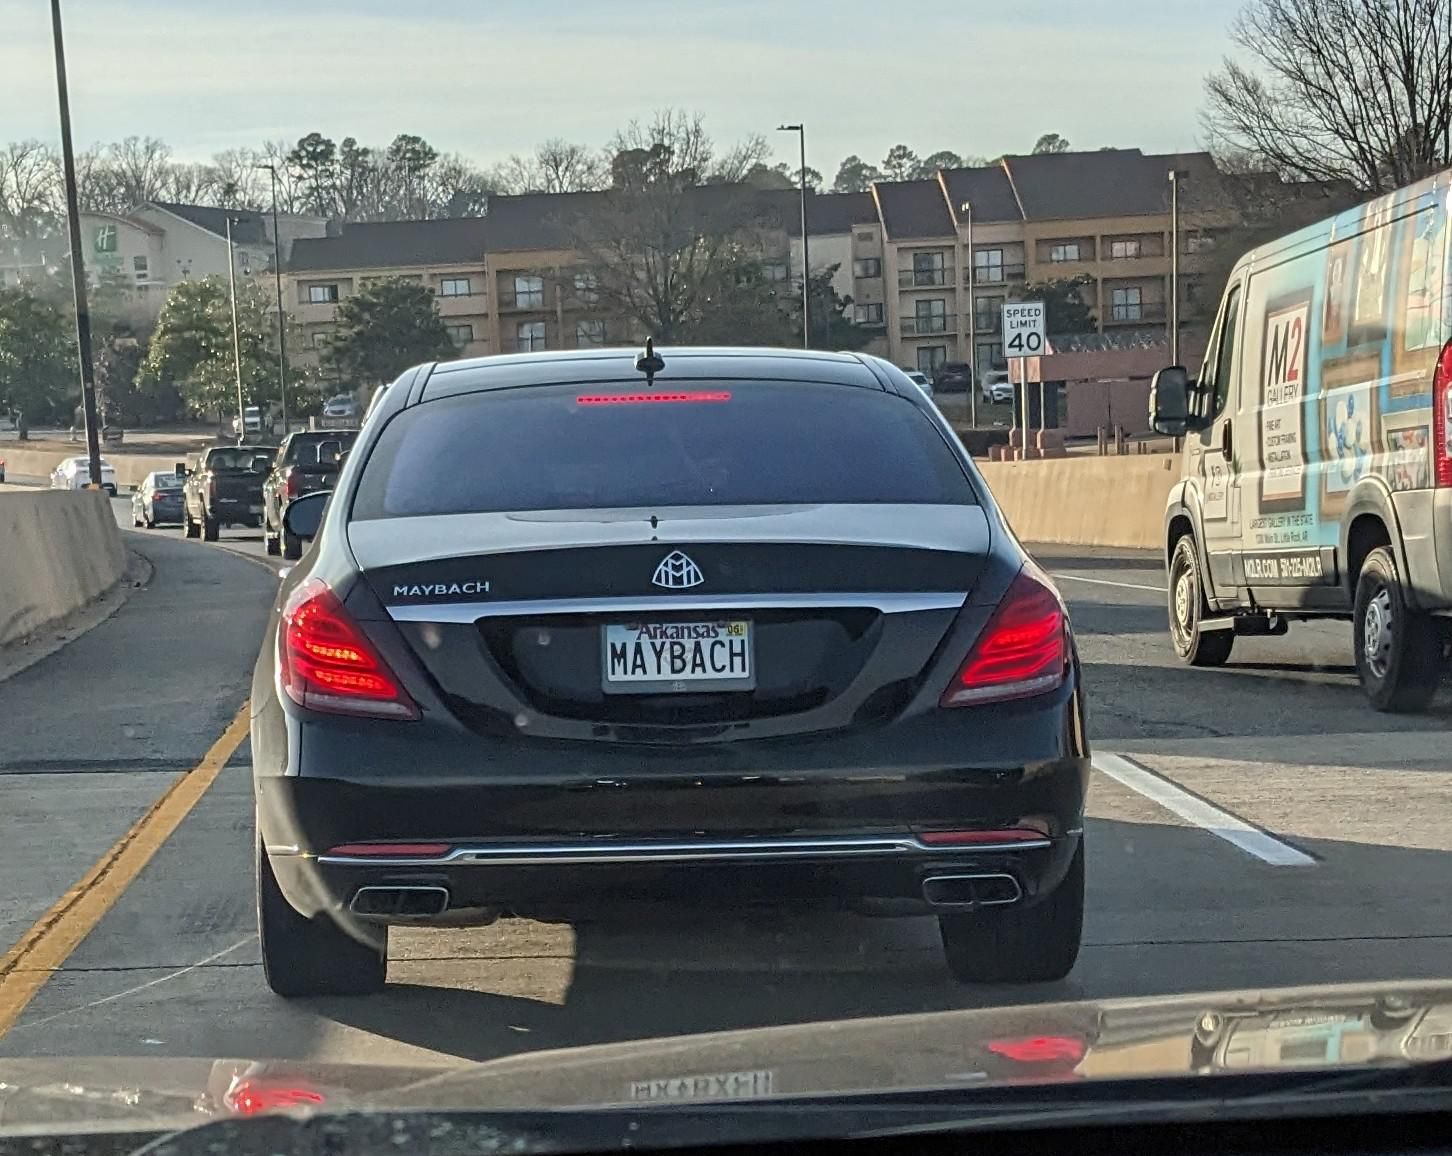 Guess they really want everyone to know they drive a Maybach. Had to look up this car brand.